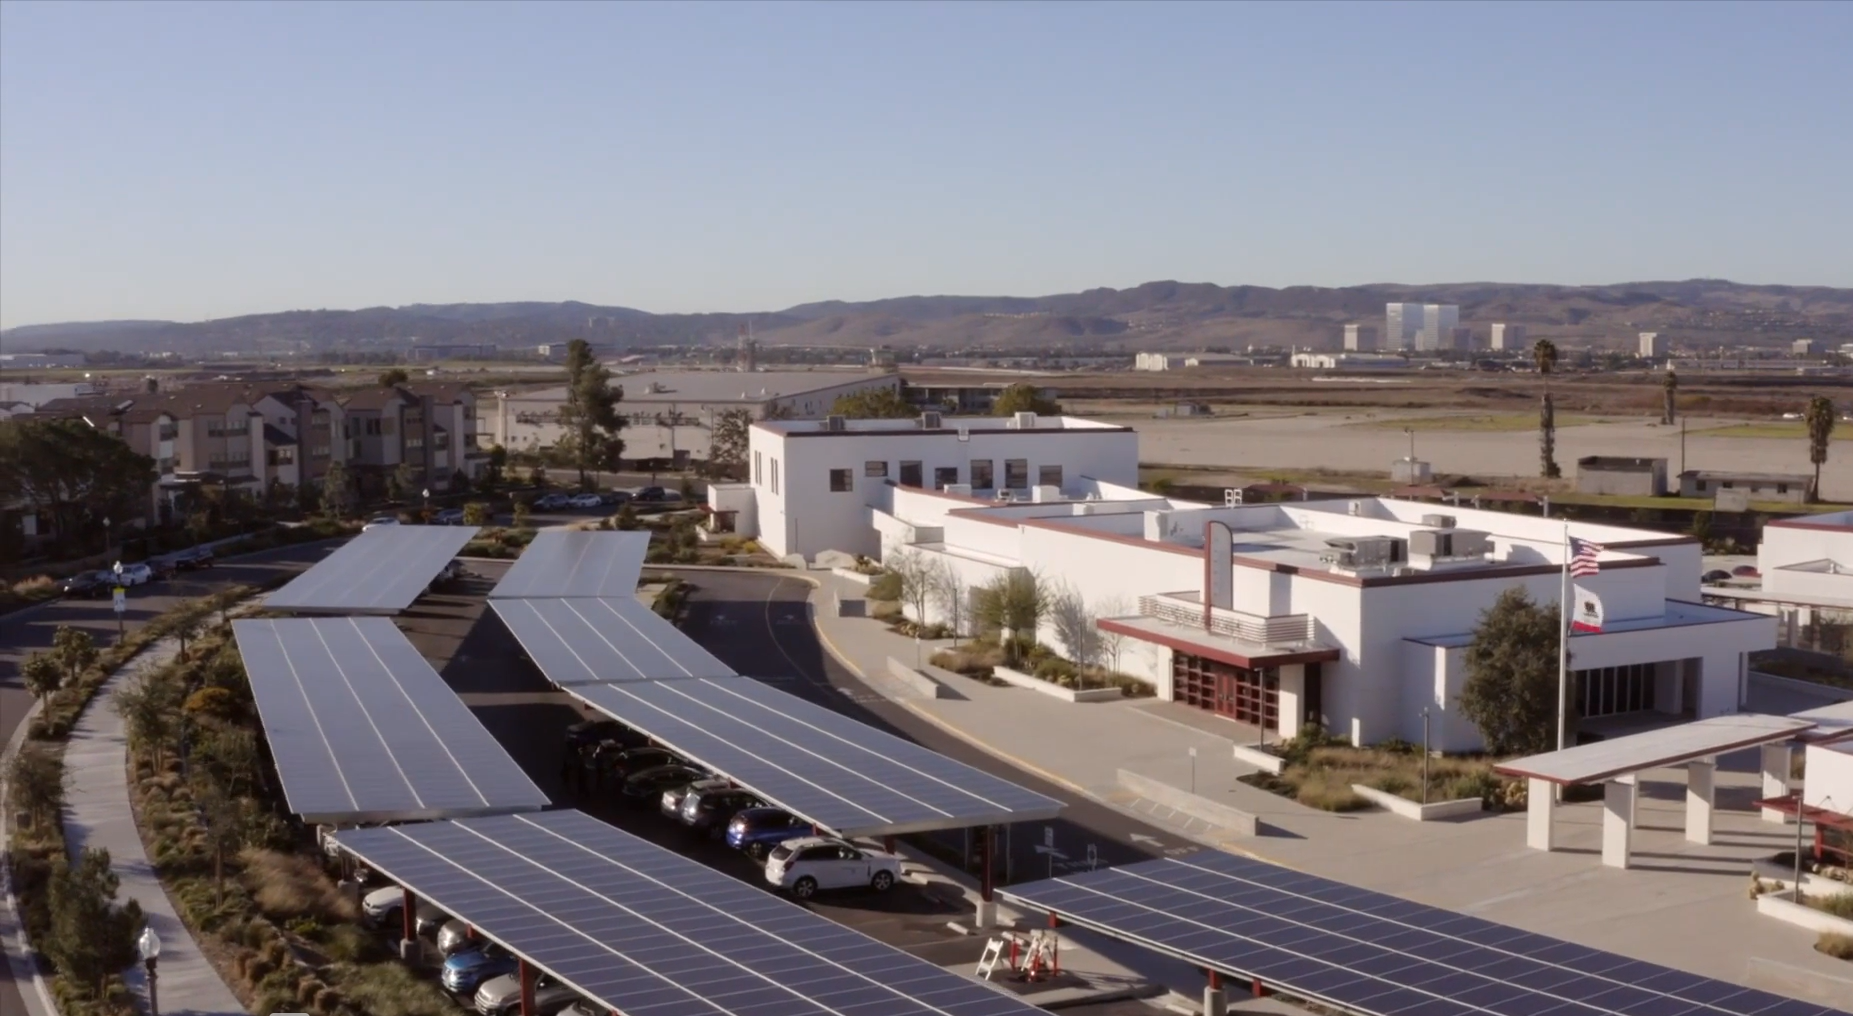 Aerial view of solar carport canopy in the parking lot of a school in California - Onyx Renewables